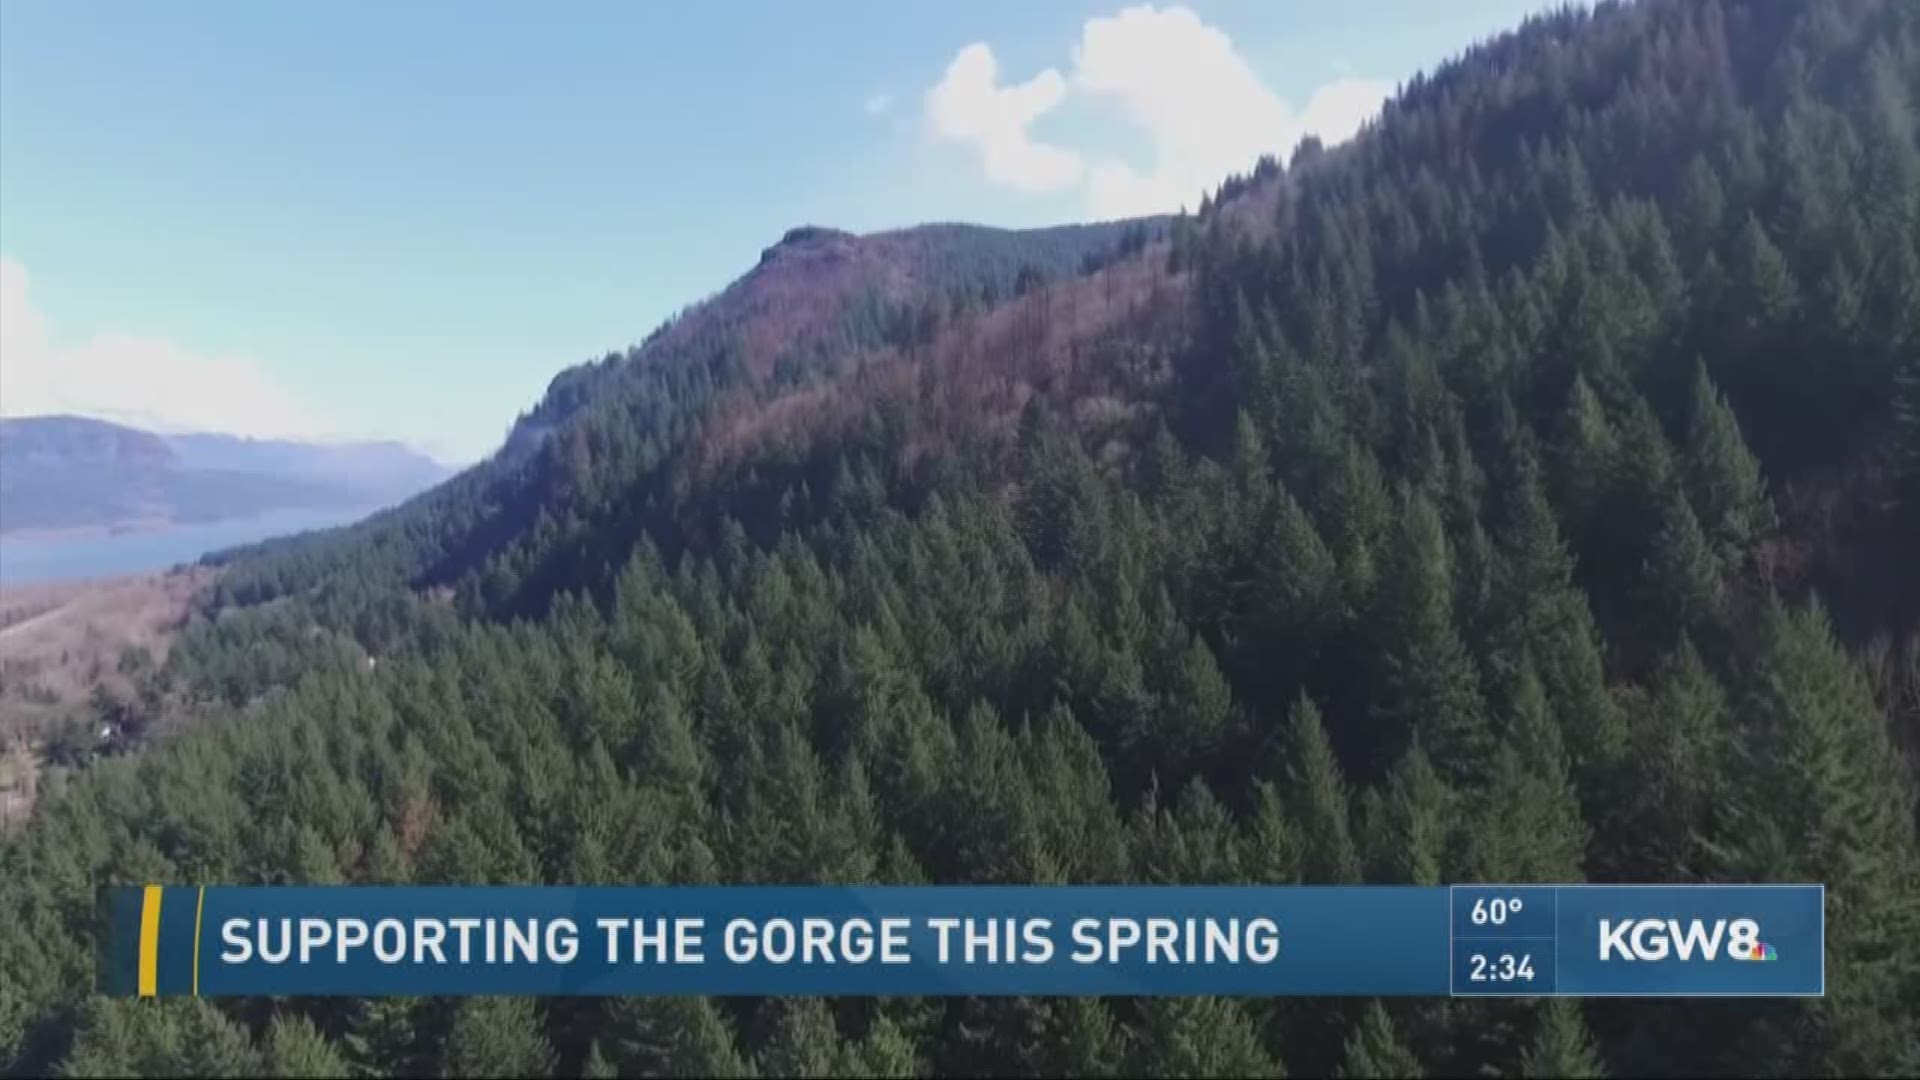 Supporting the Gorge this spring 